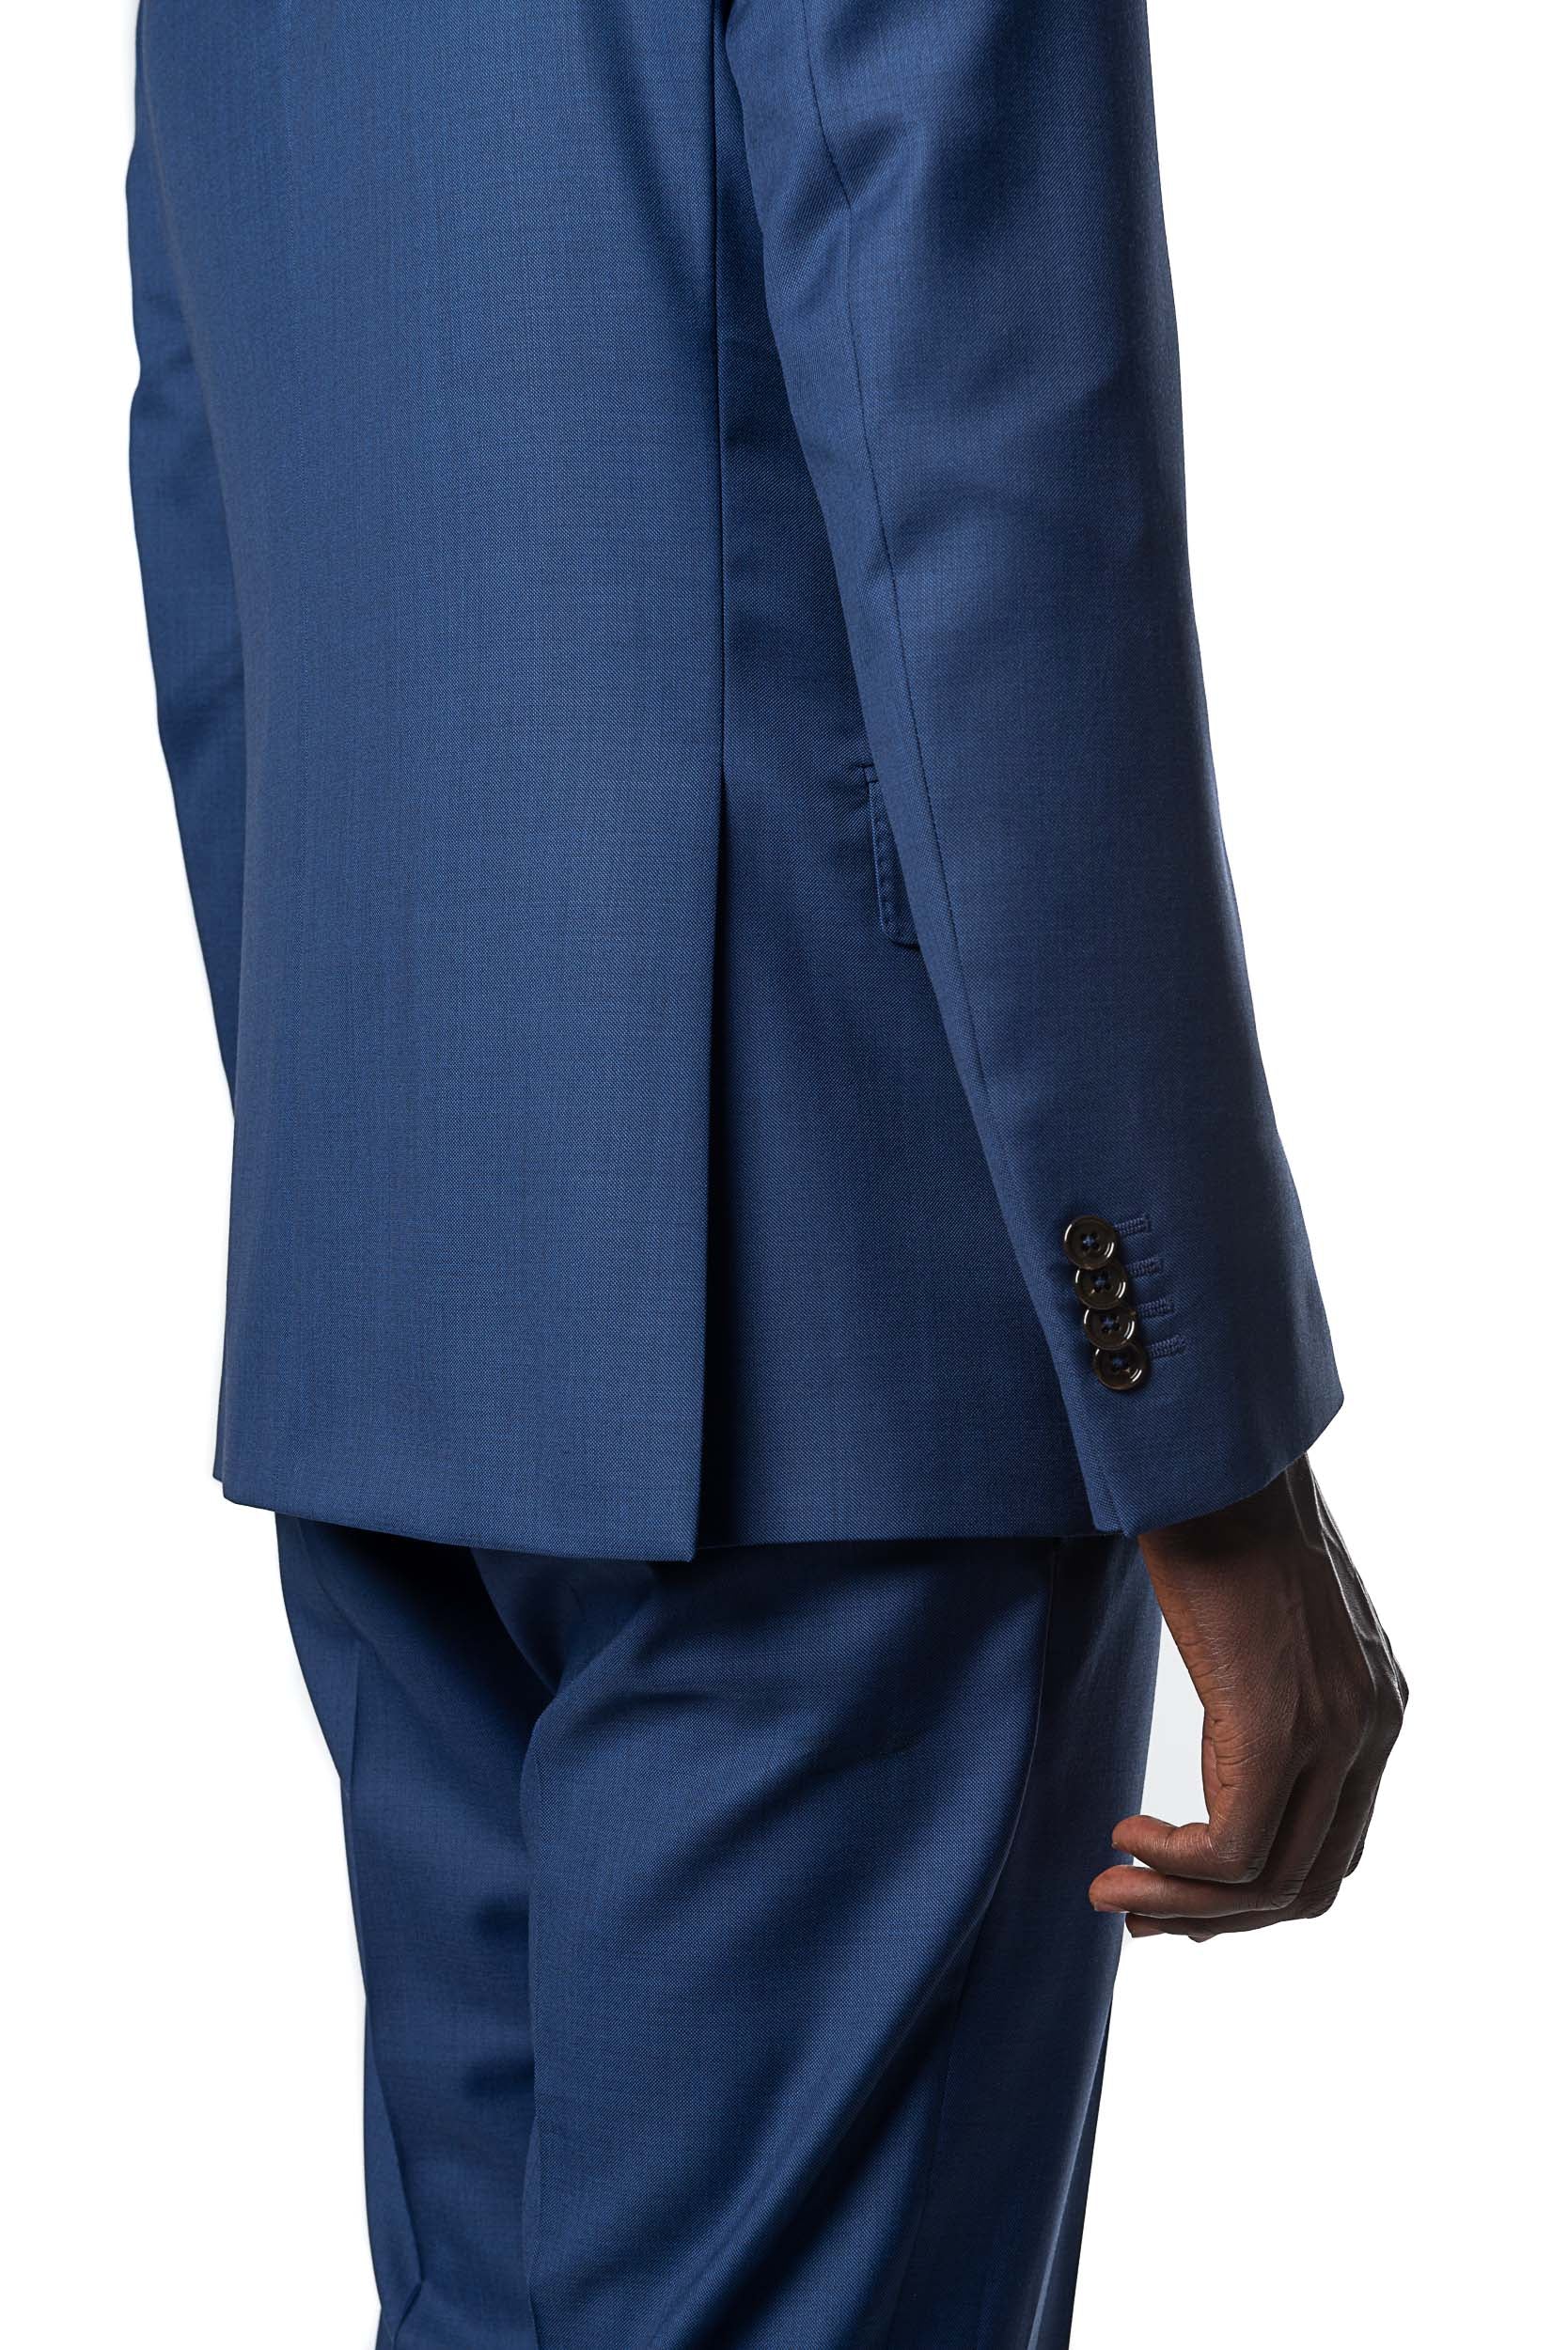 Royal Blue Suit Made in Wool from the Vitale Barberis Canonico Woollen Mill.